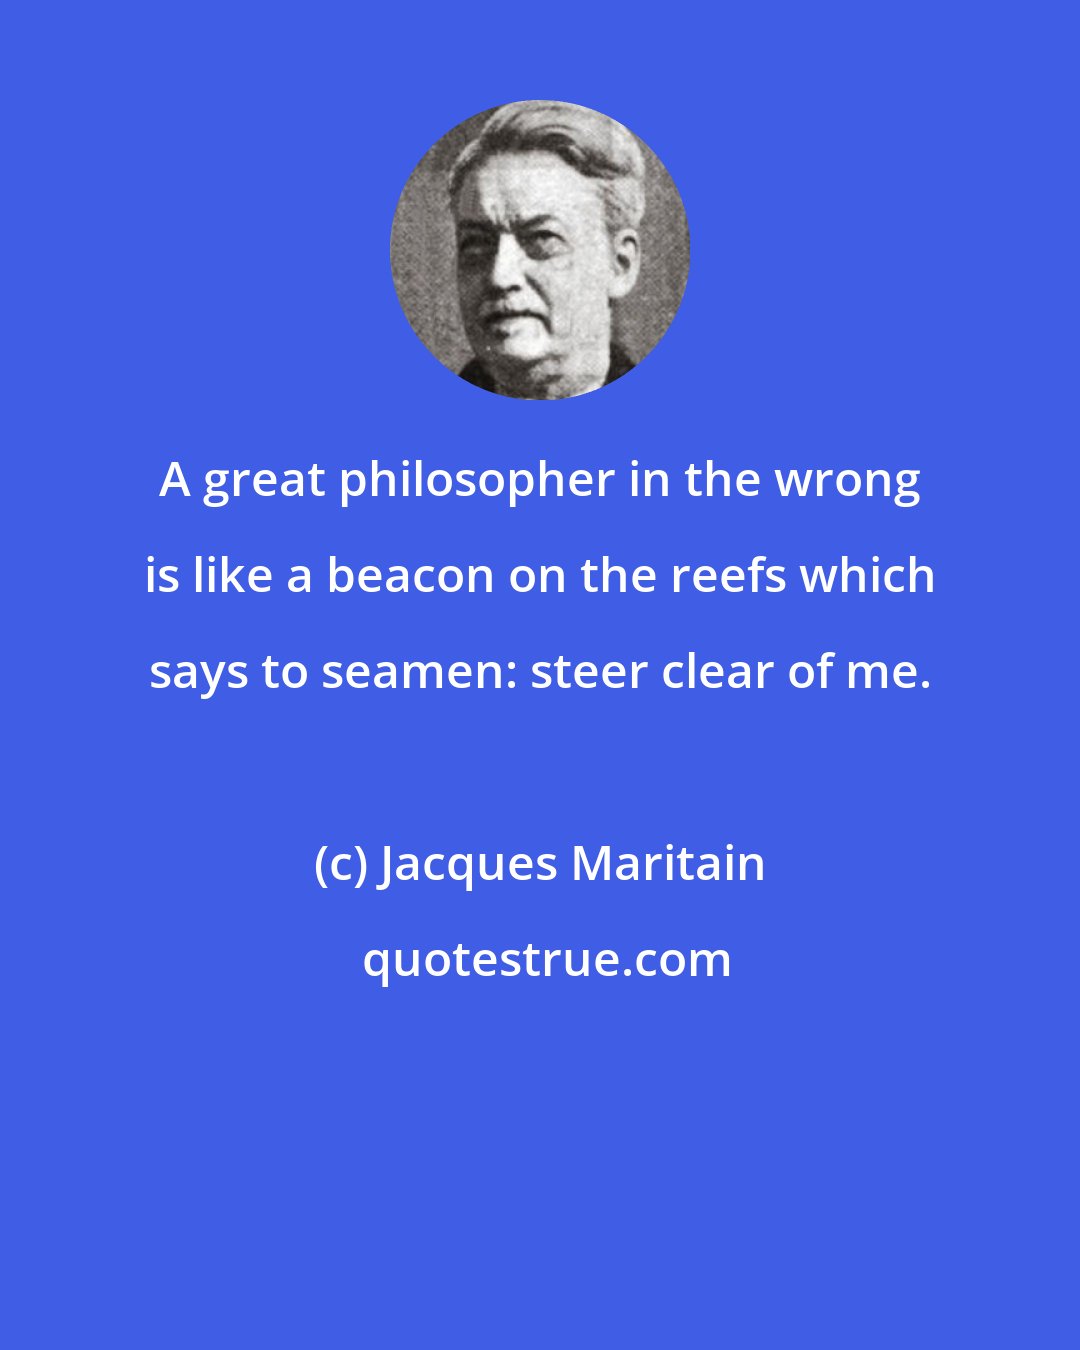 Jacques Maritain: A great philosopher in the wrong is like a beacon on the reefs which says to seamen: steer clear of me.